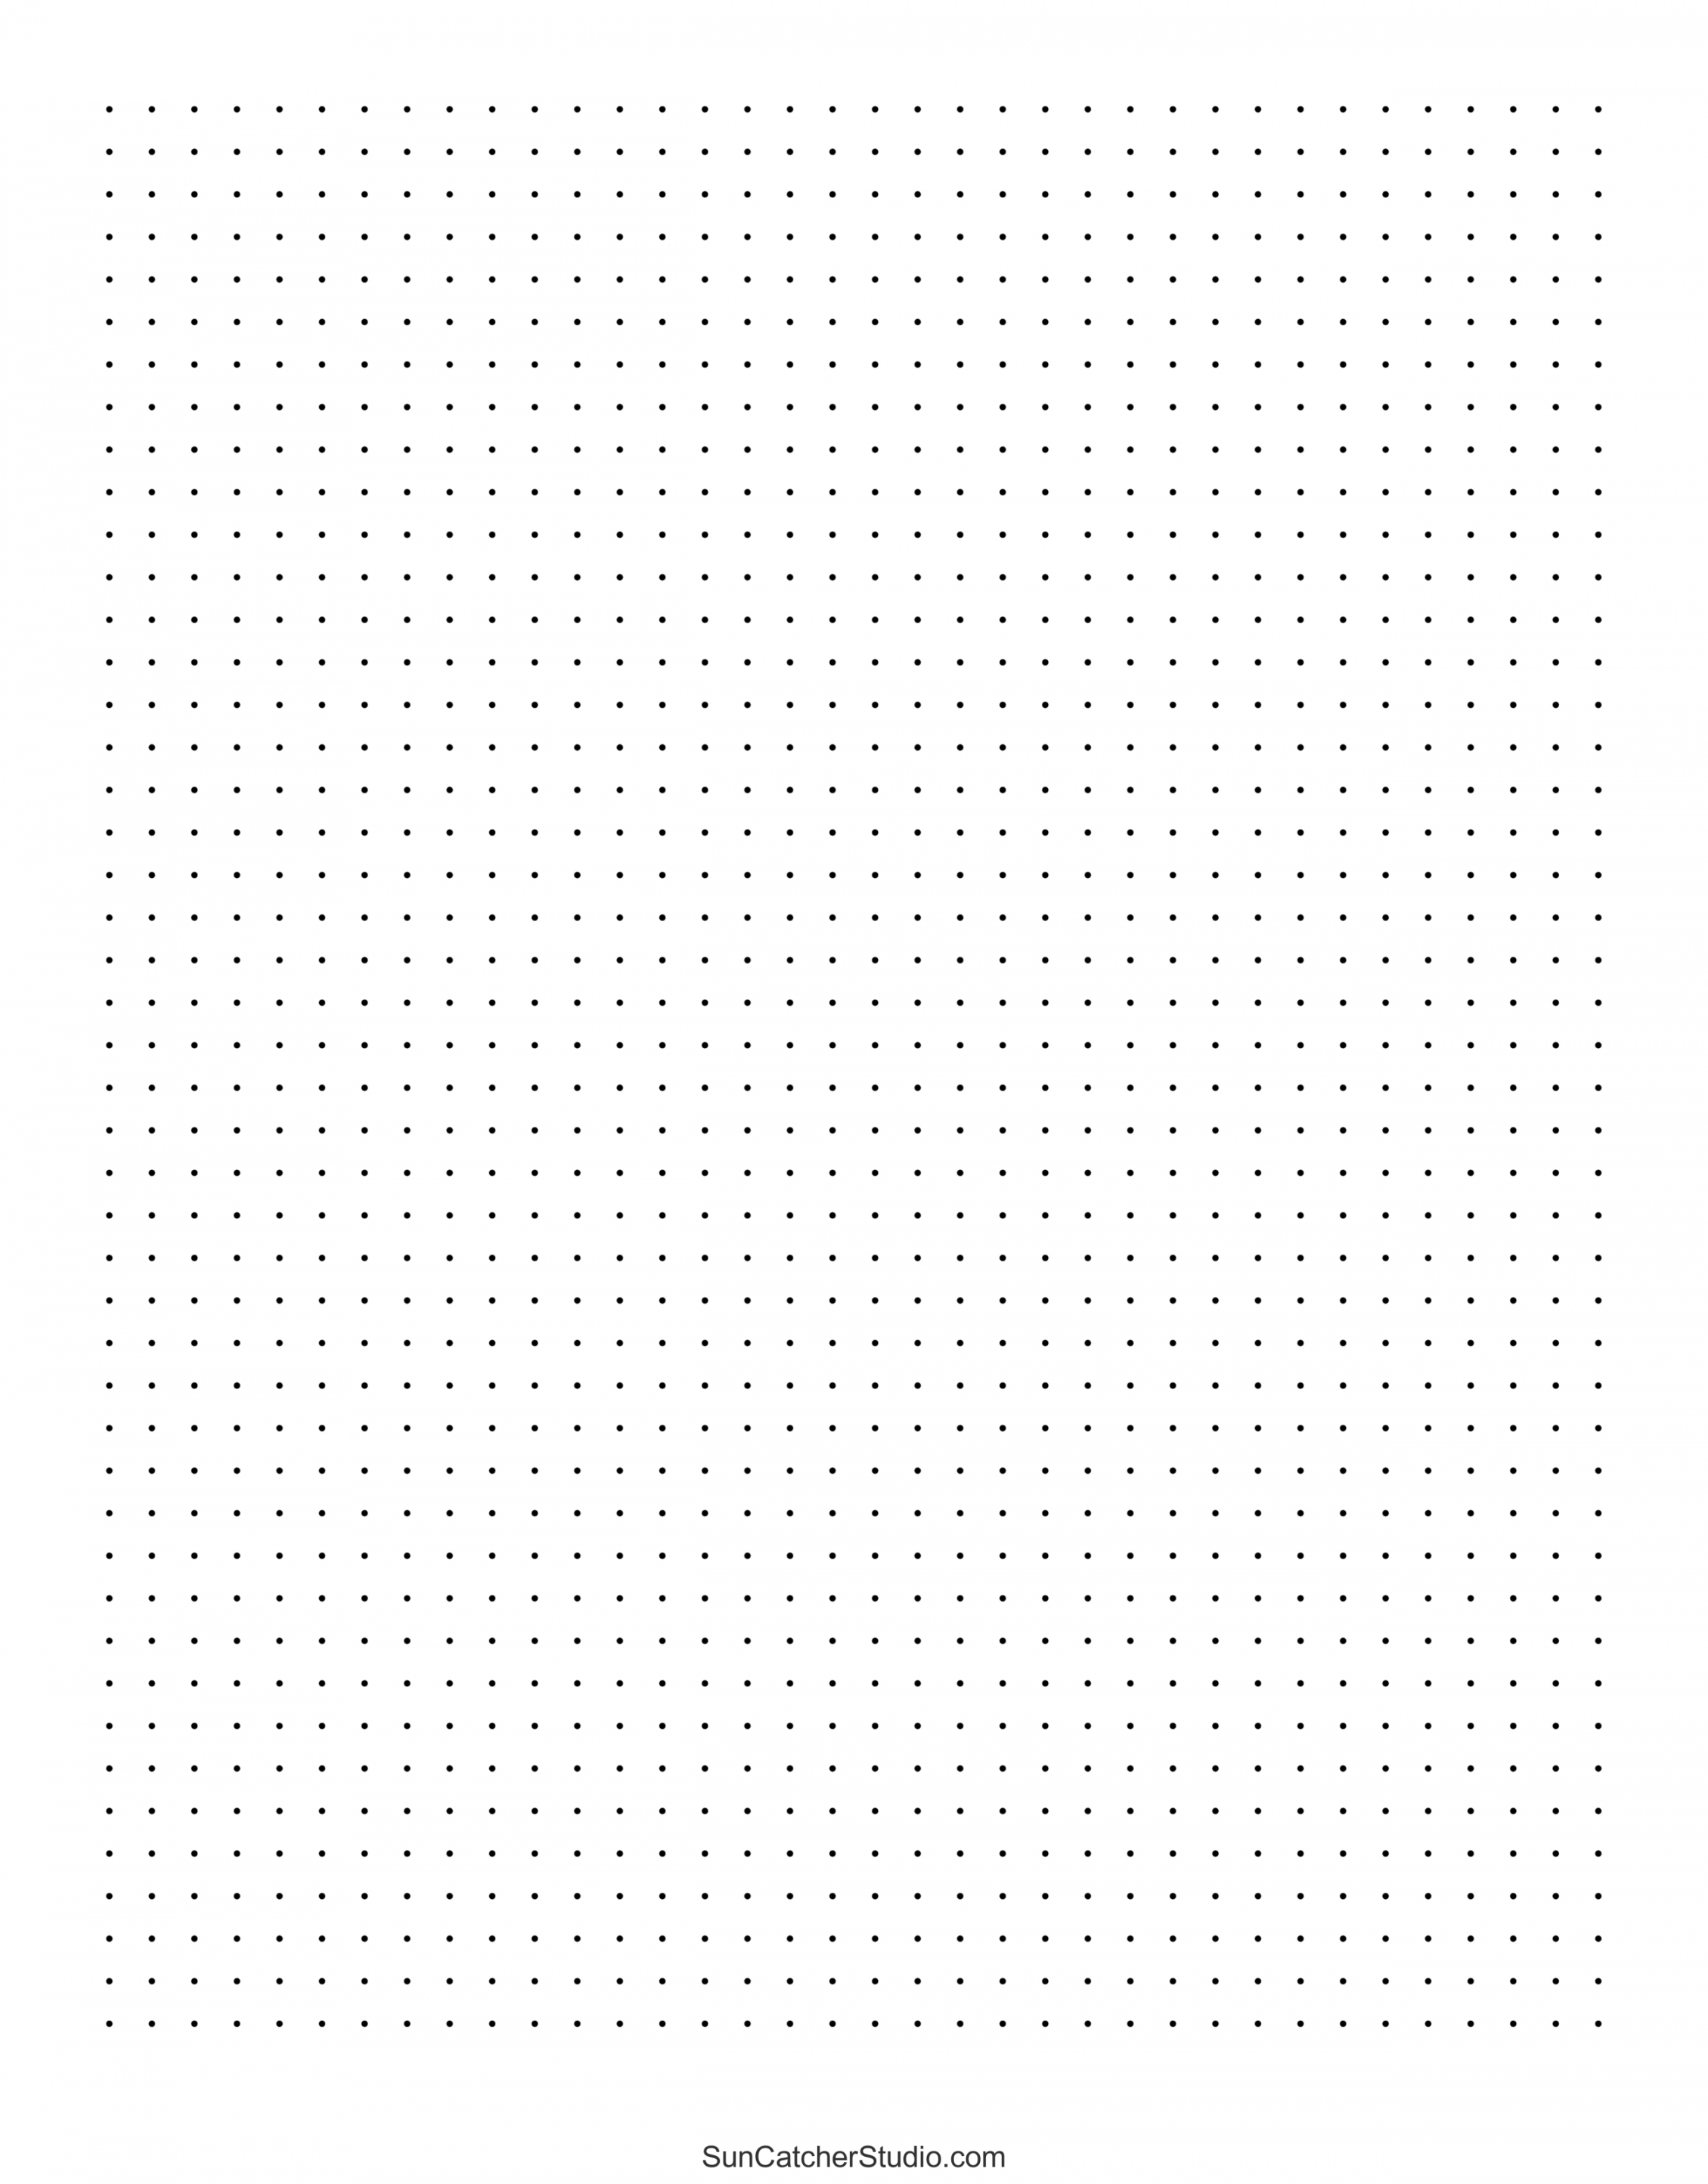 Free Printable Dot Paper: Dotted Grid Sheets (PDF & PNG) – DIY  - FREE Printables - Dotted Paper Printable